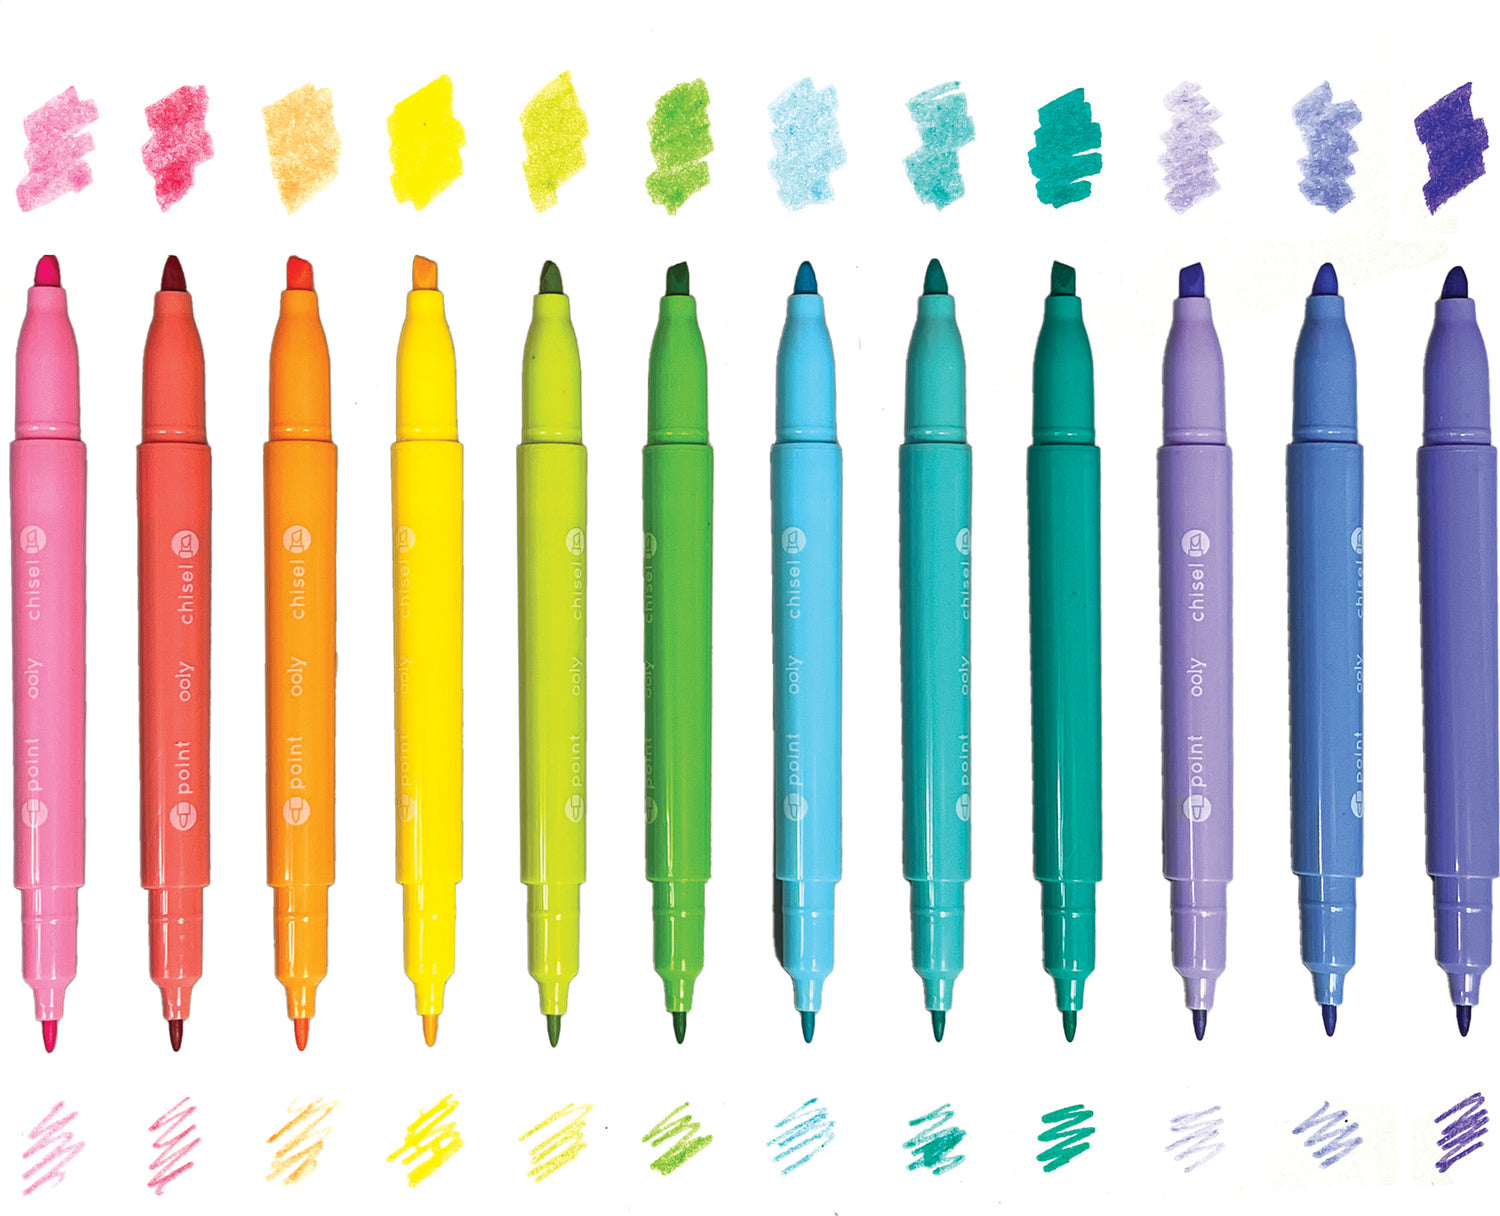 OOLY Stamp-A-Doodle Double-Ended Markers (Set of 12 w/ 9 Colors)